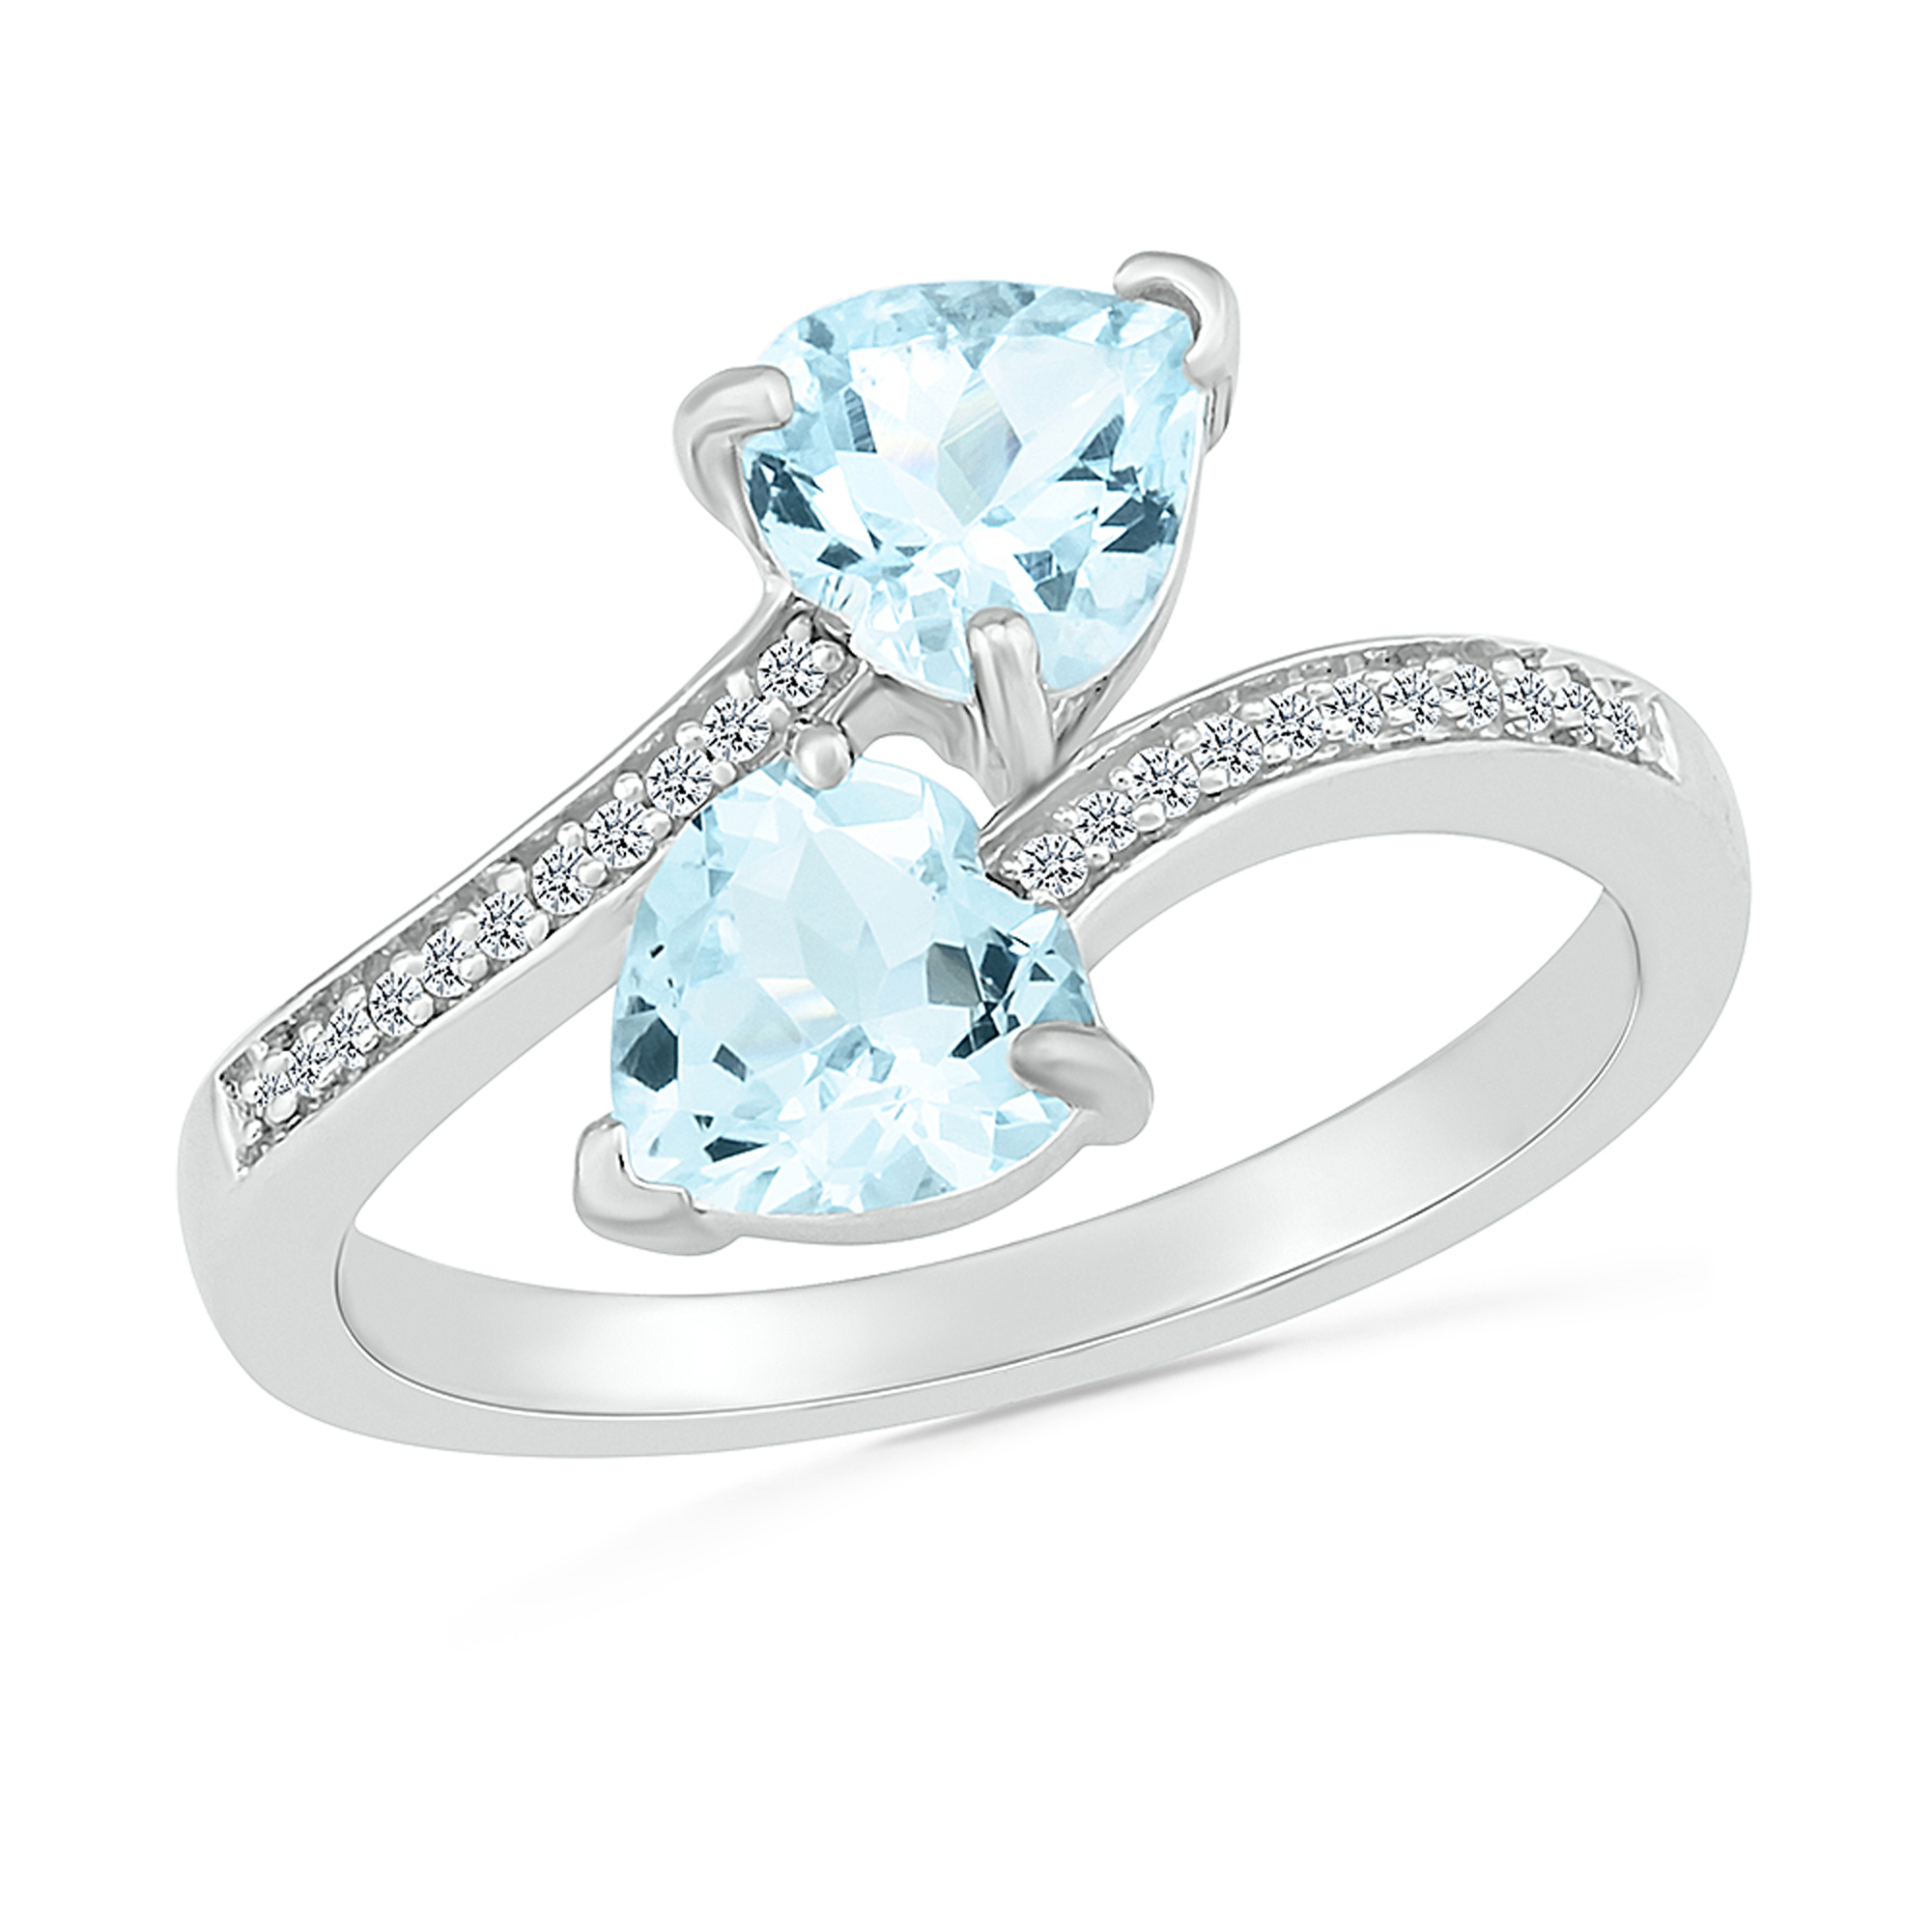 Double Heart-Shaped Aquamarine Diamond Accent Sterling Silver Ring - Size 6